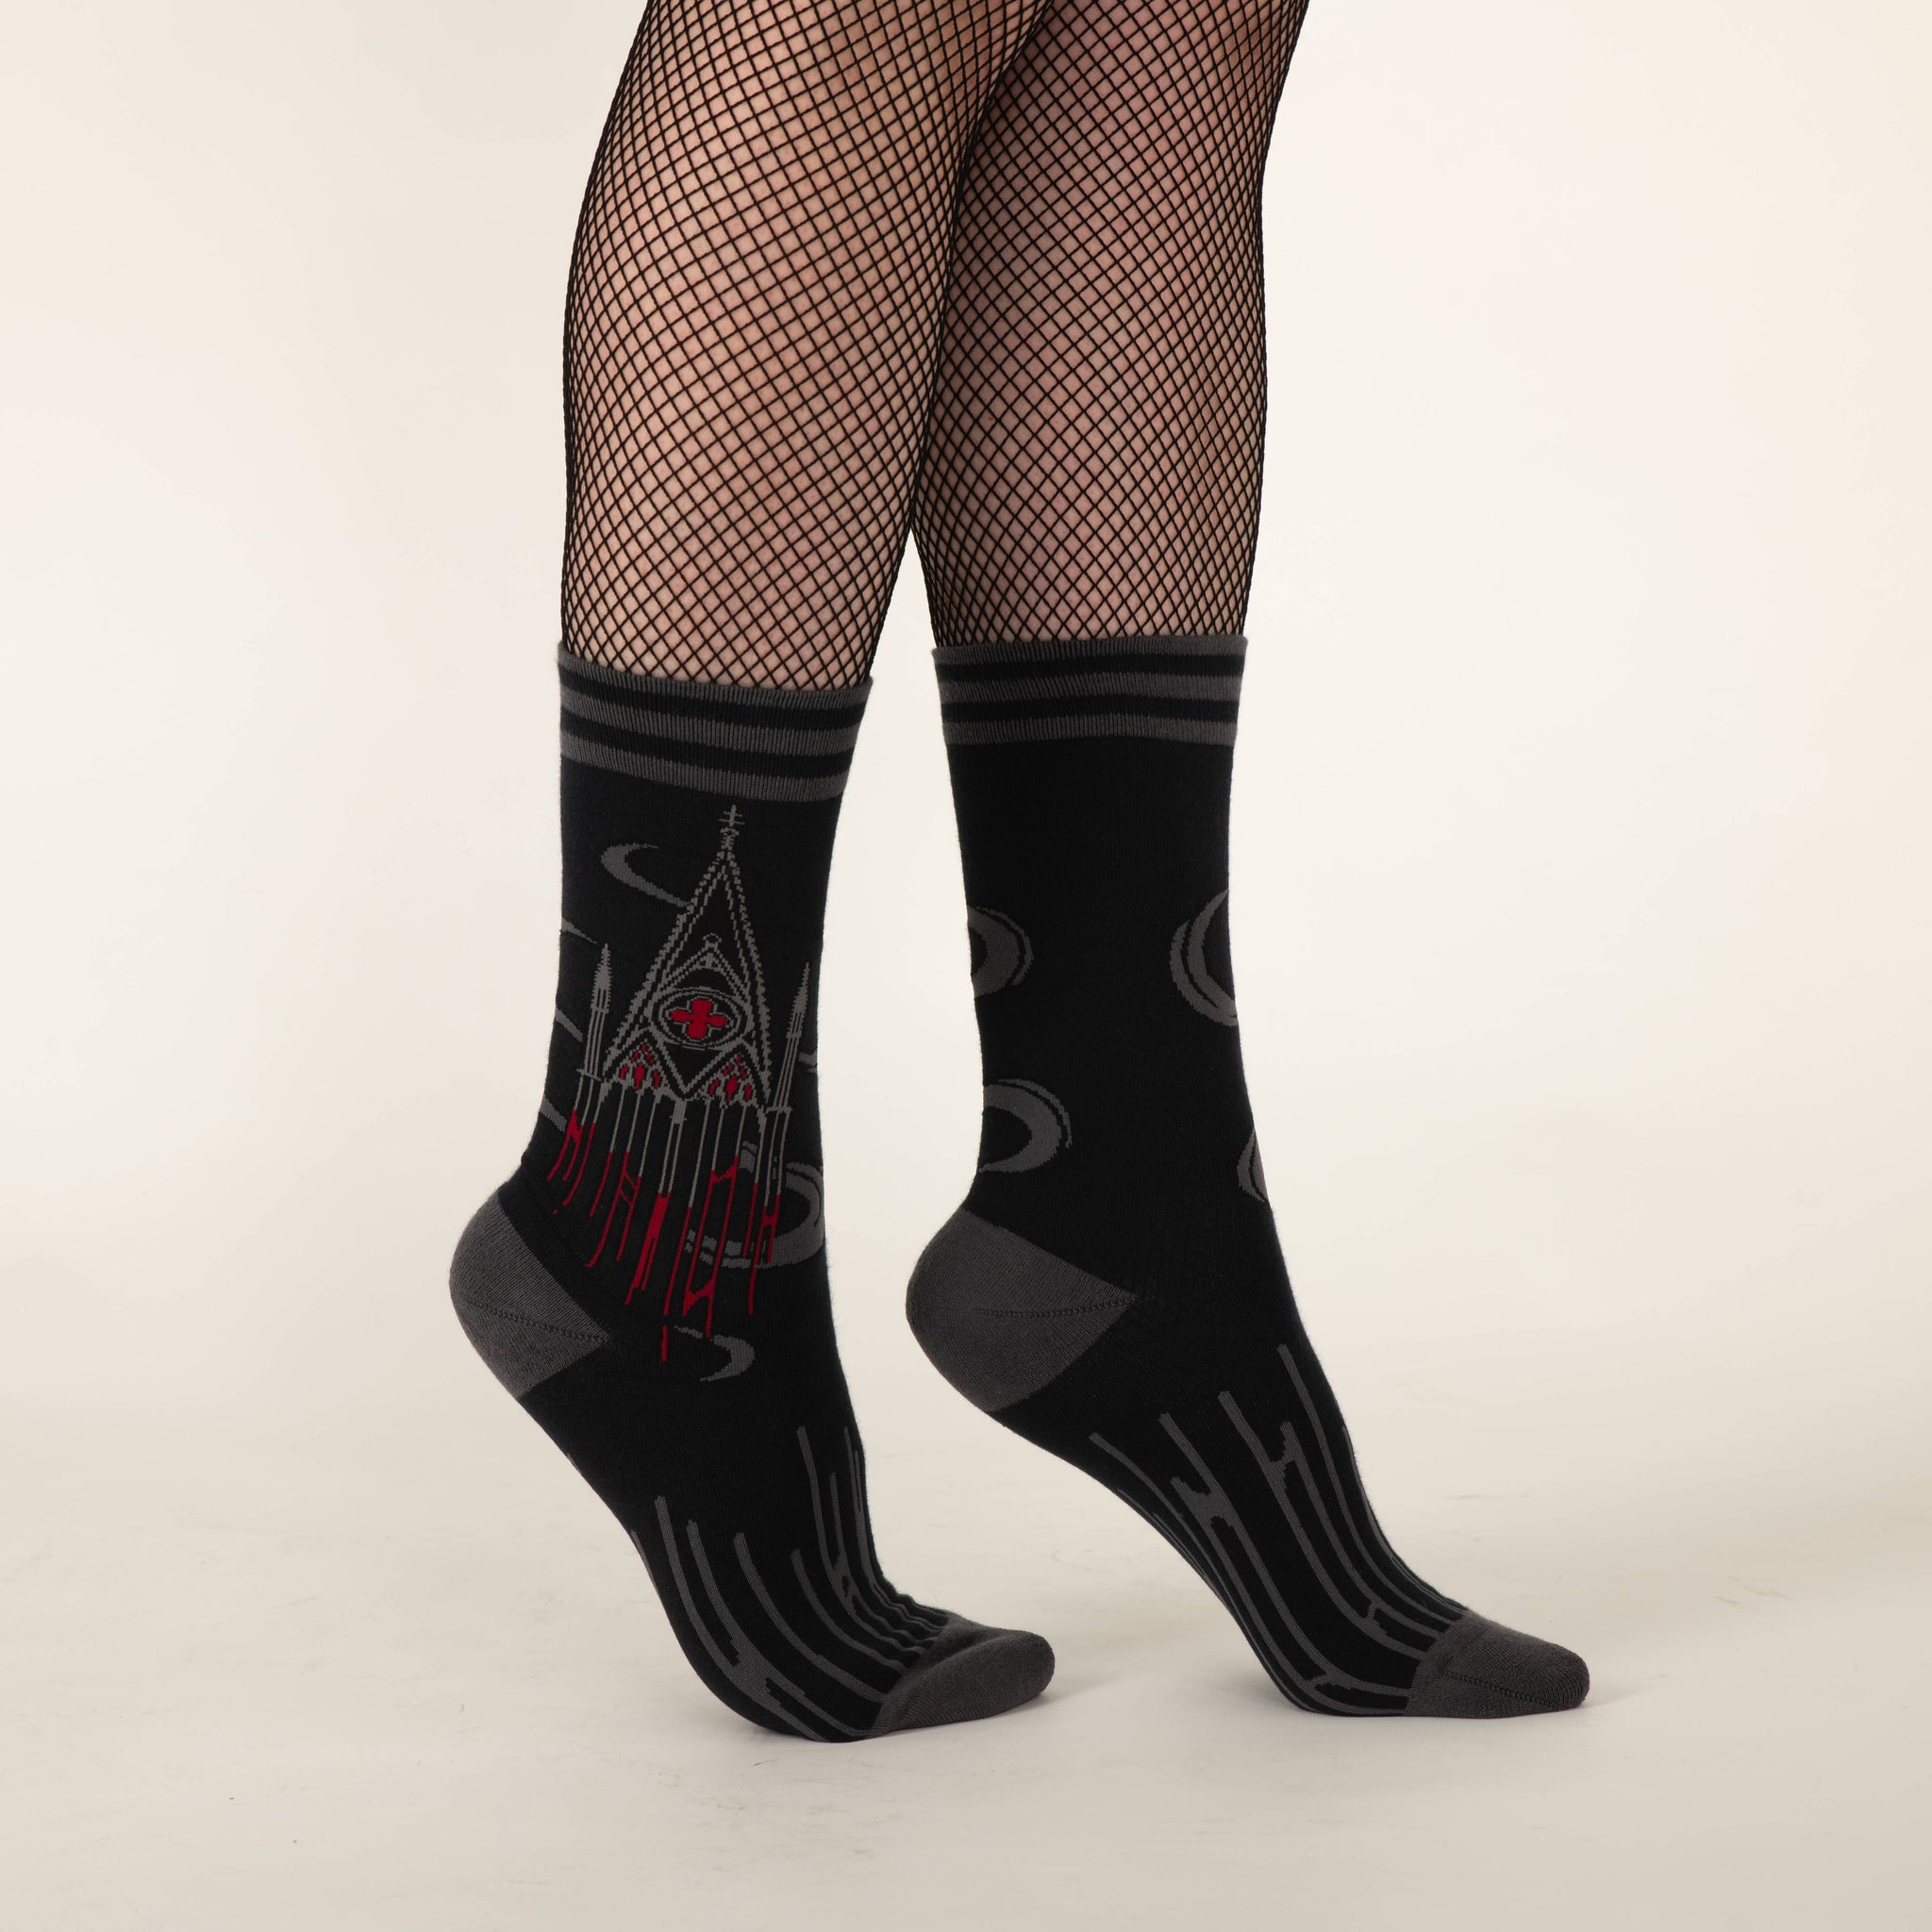 Blood Cathedral FootClothes x Hagborn Collab Socks